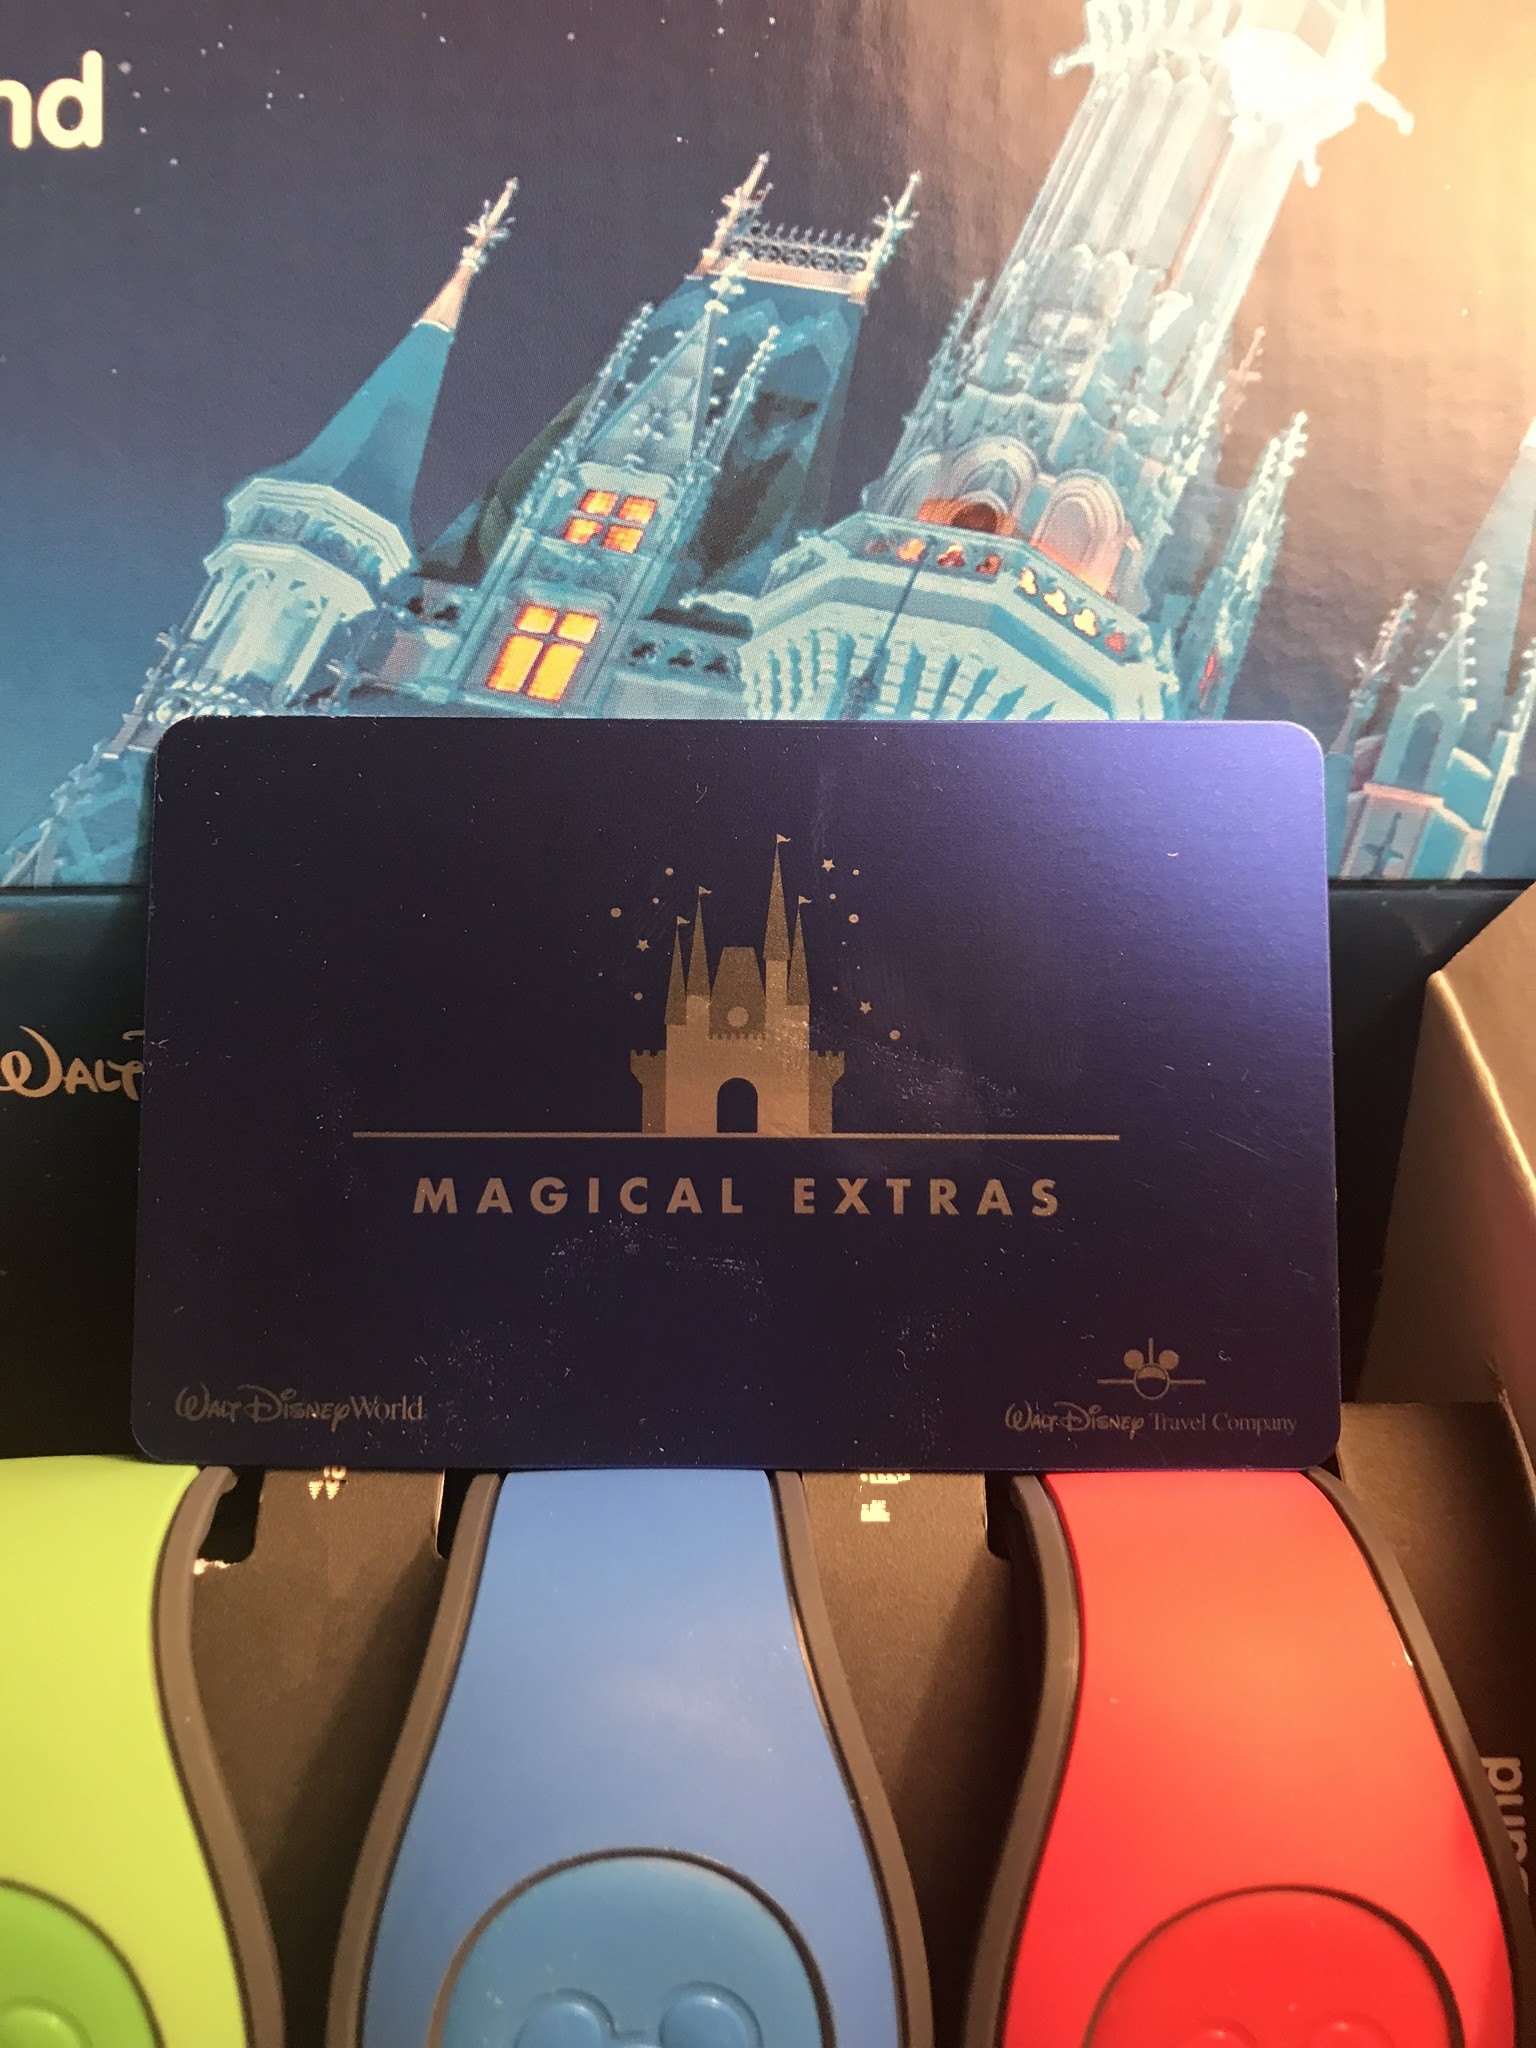 Disney’s Magical Extras Add Even More Magic for 2018